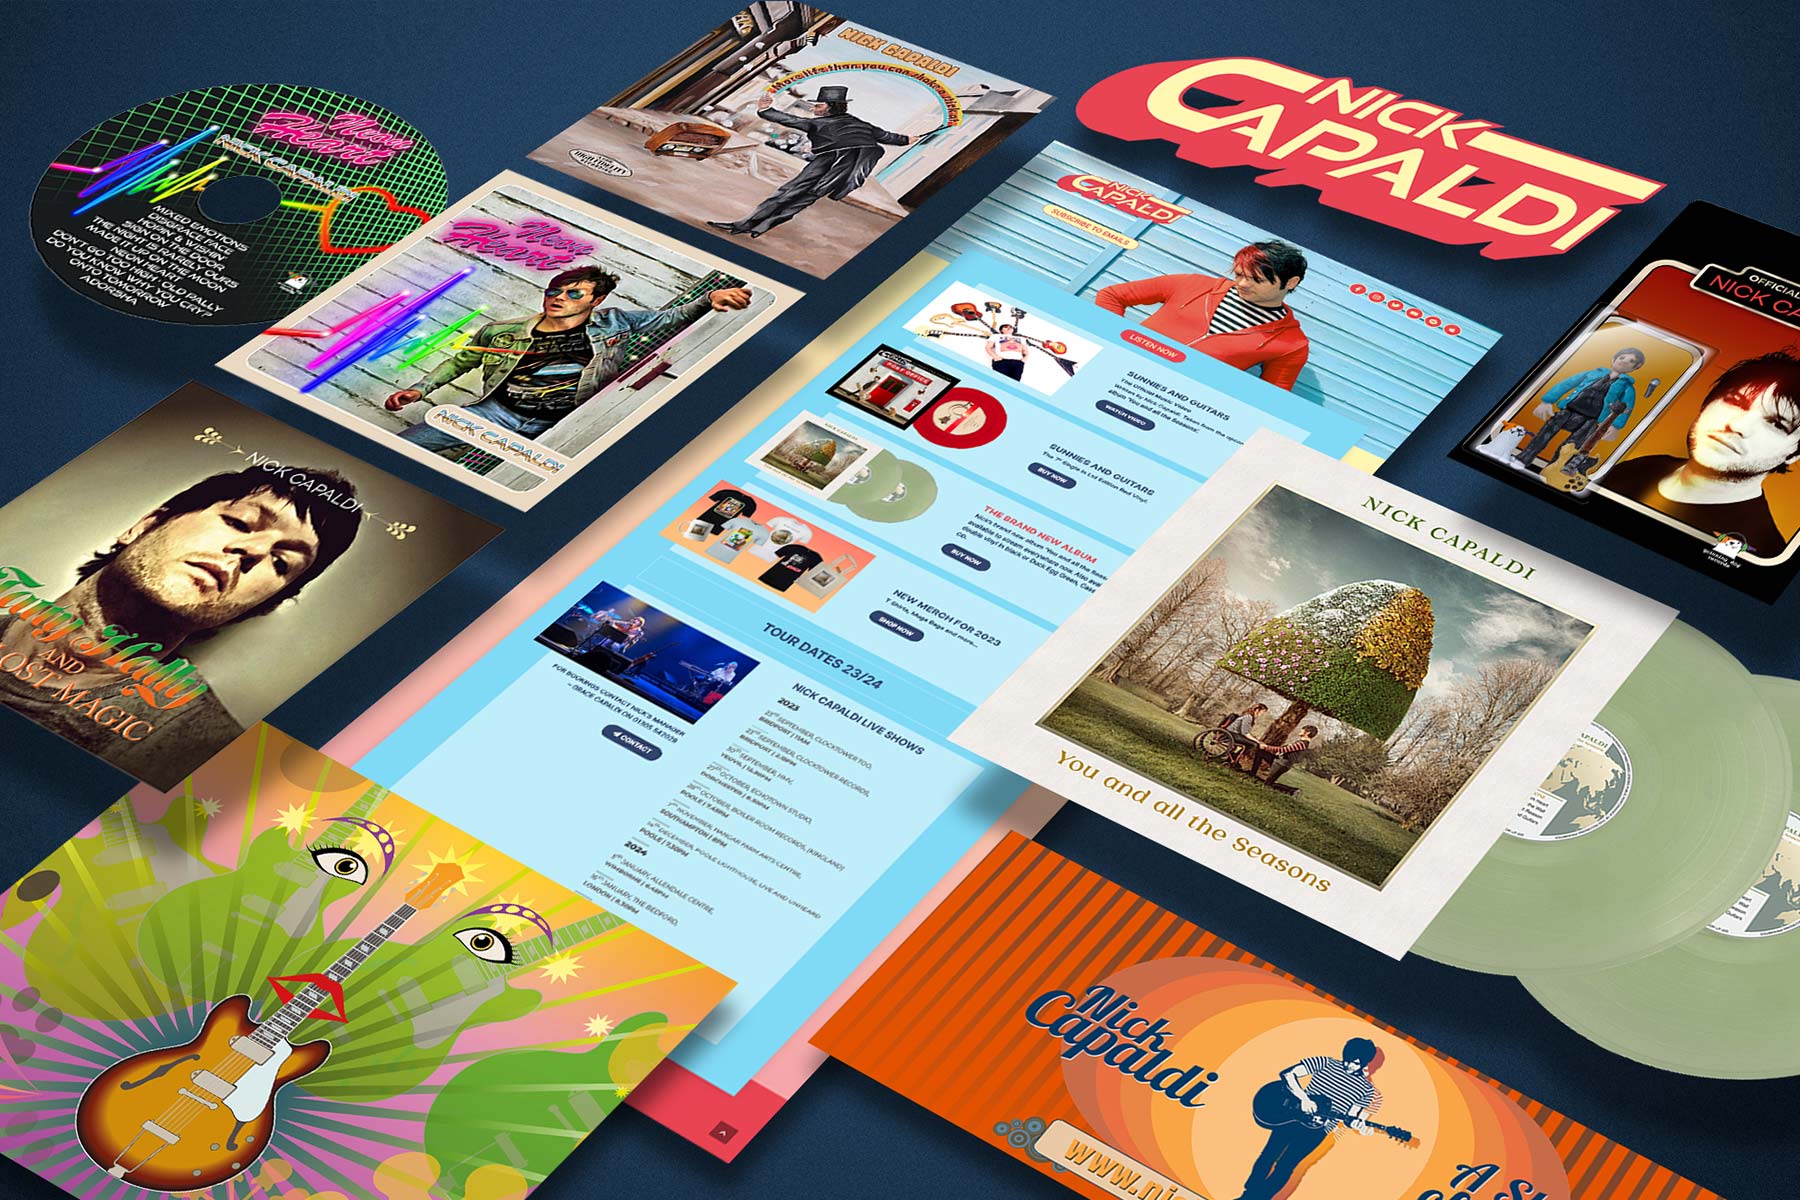 didier.co.uk - Web design, Graphic design and artwork for the music industry - Case study: Nick Capaldi